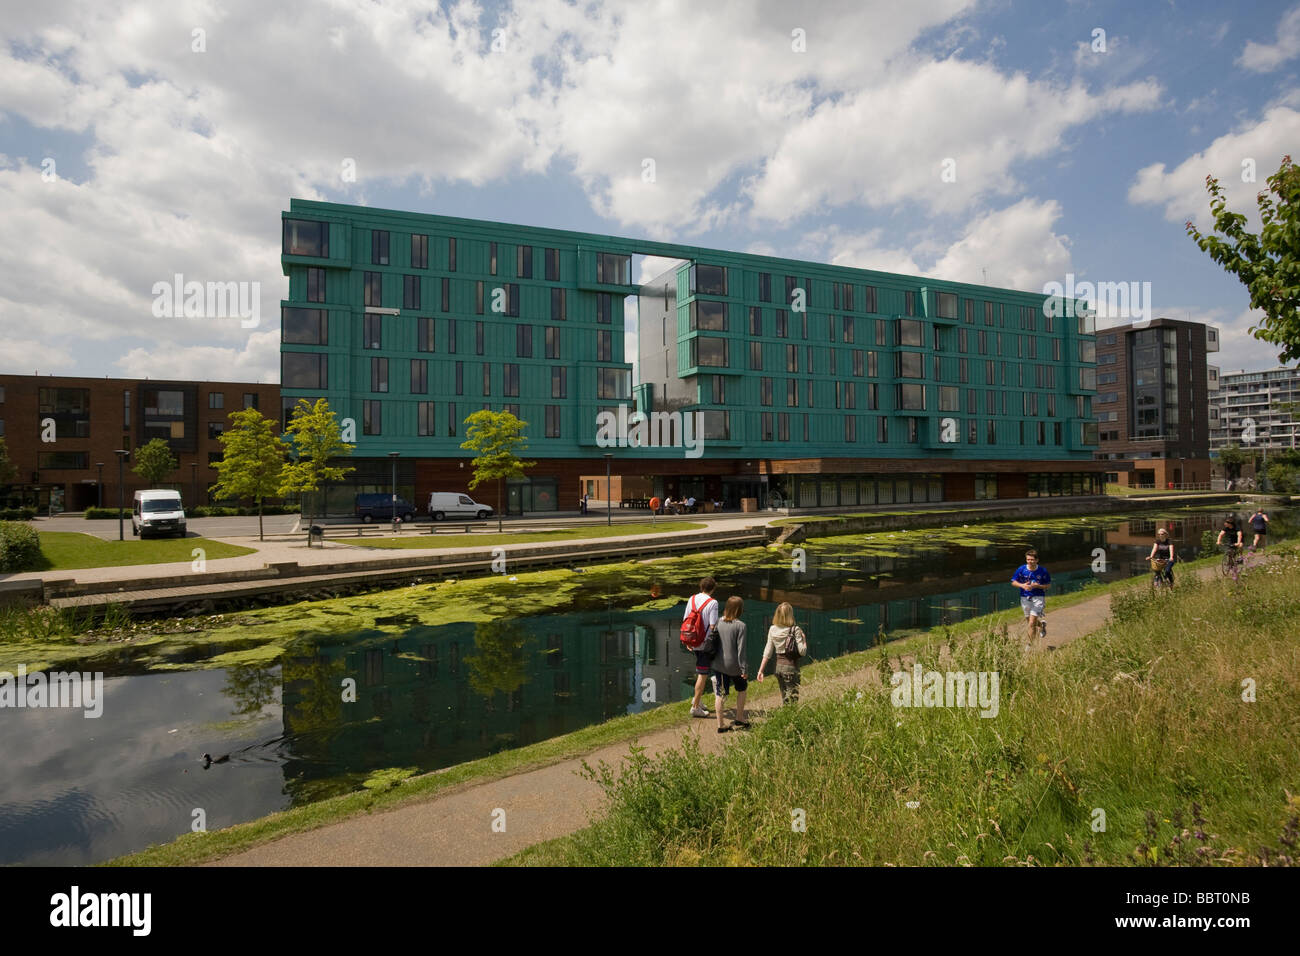 "Queen Mary College der" "University of London" "Mile End Campus" "Studentendorf" QMC Mile End Park "Regents Canal" "Mile End" Stockfoto